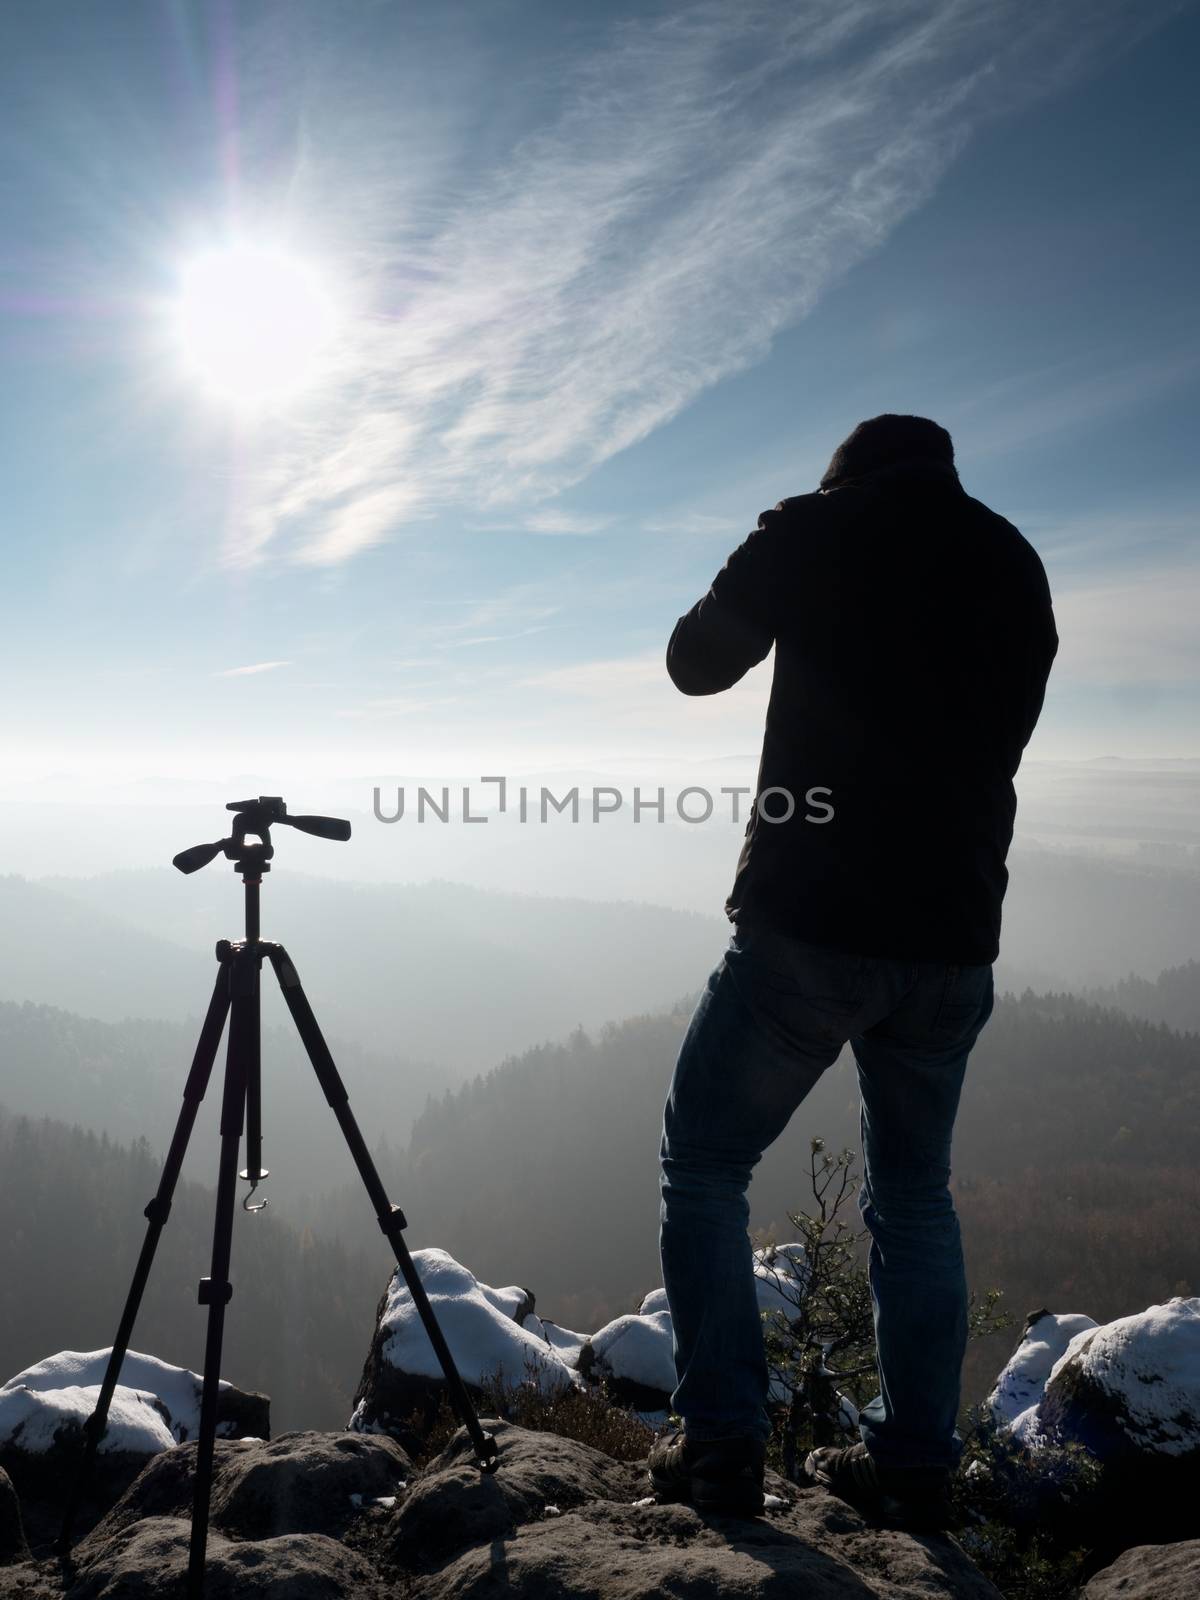 Nature photographer stay with camera ind hands  at tripod on rock and thinking. First snow. Dreamy fogy landscape, orange misty sunrise in  beautiful mountains